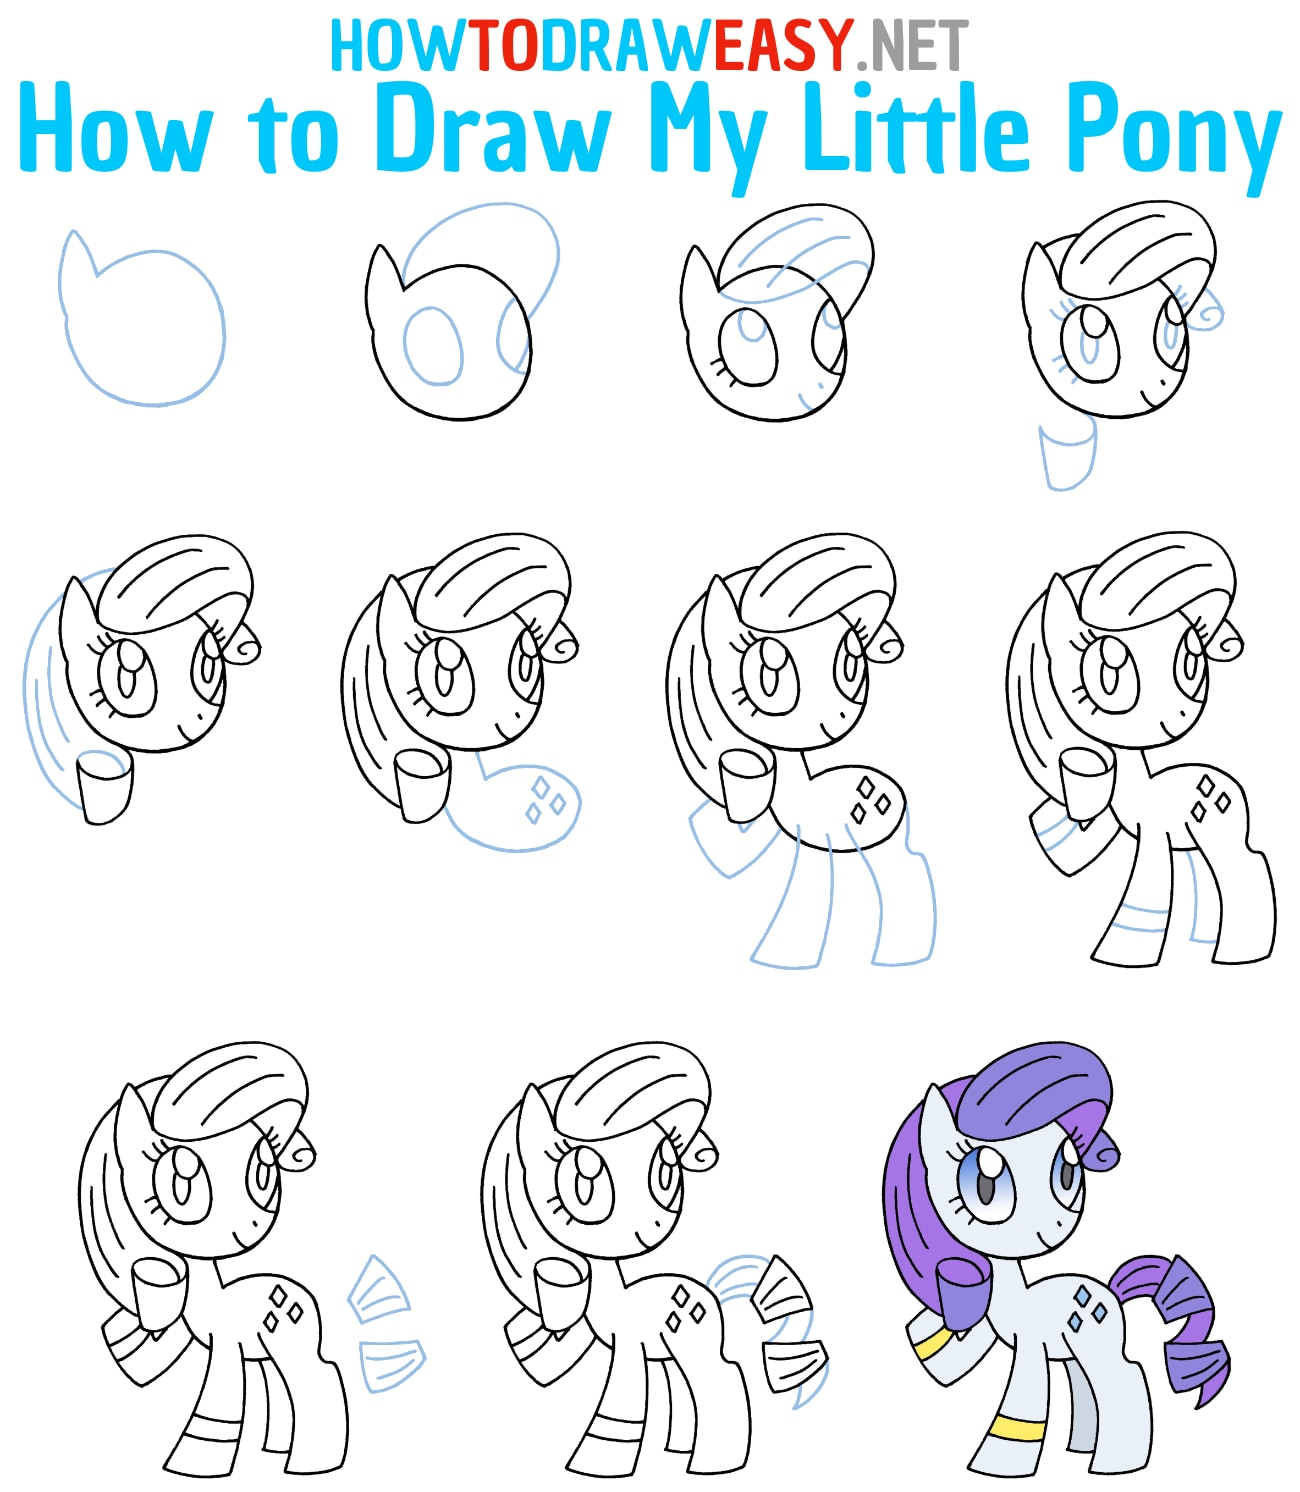 How to Draw My Little Pony Step by Step